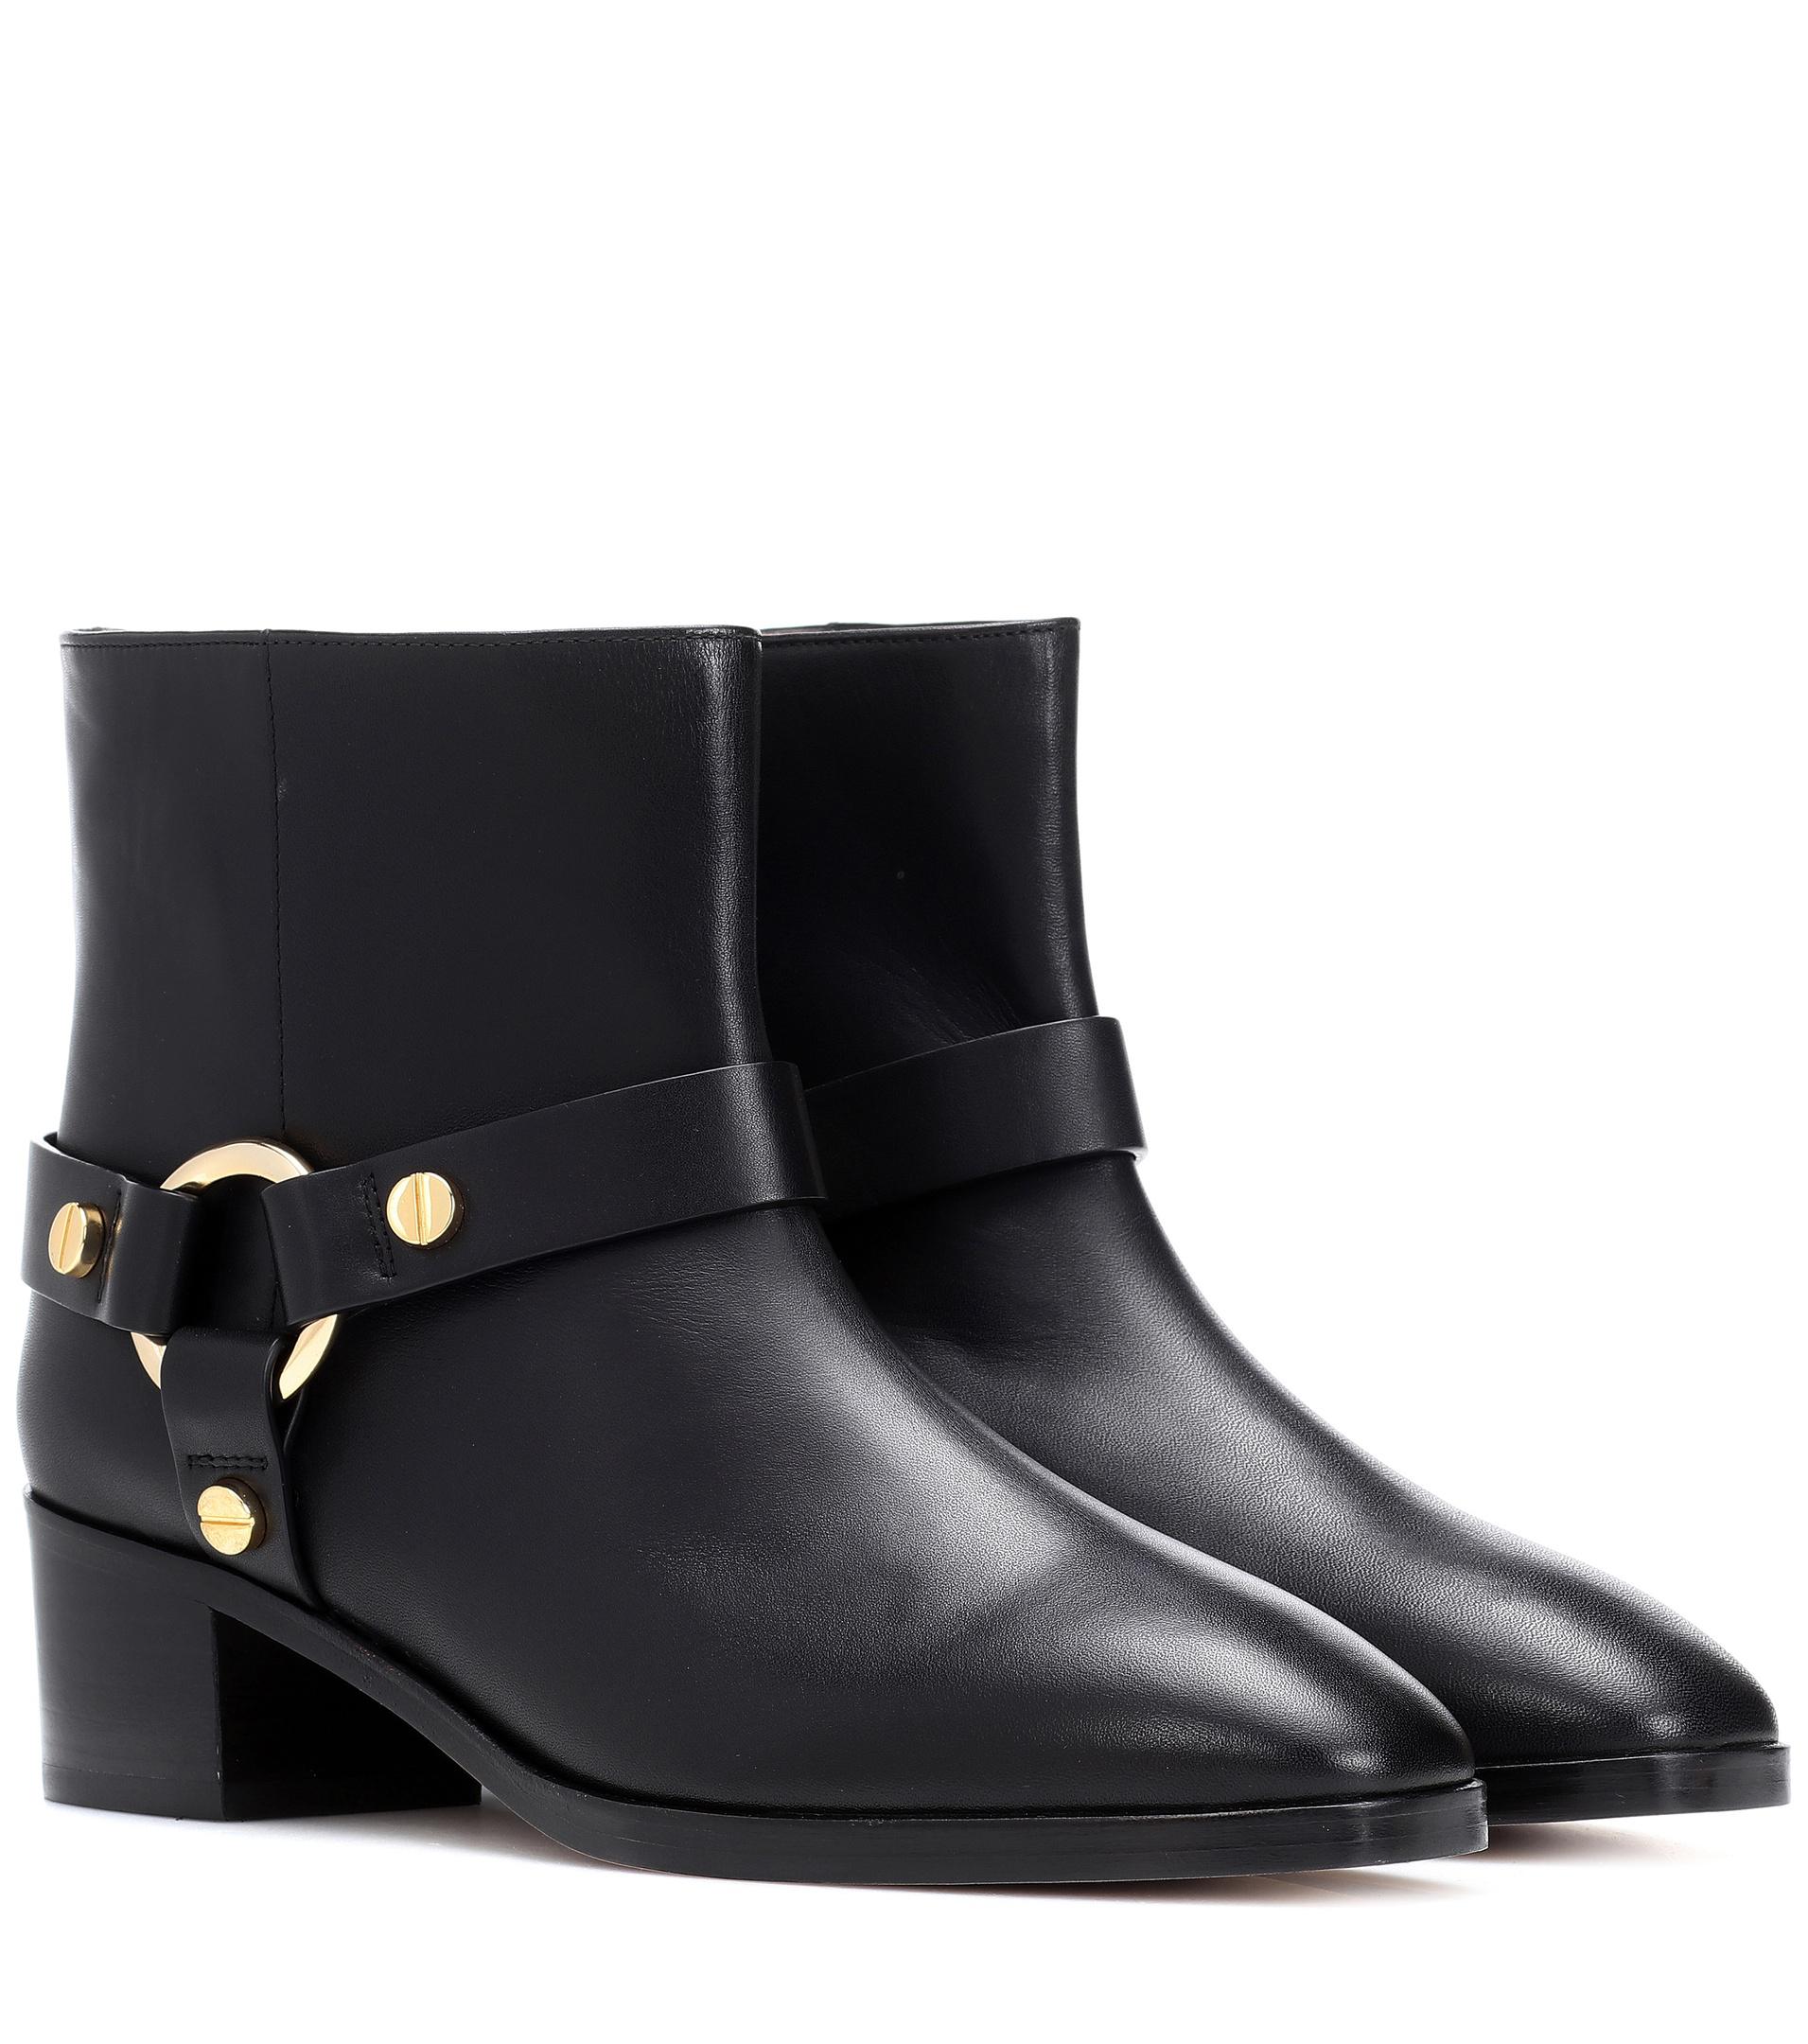 Stuart Weitzman Expert Leather Ankle Boots in Black - Lyst